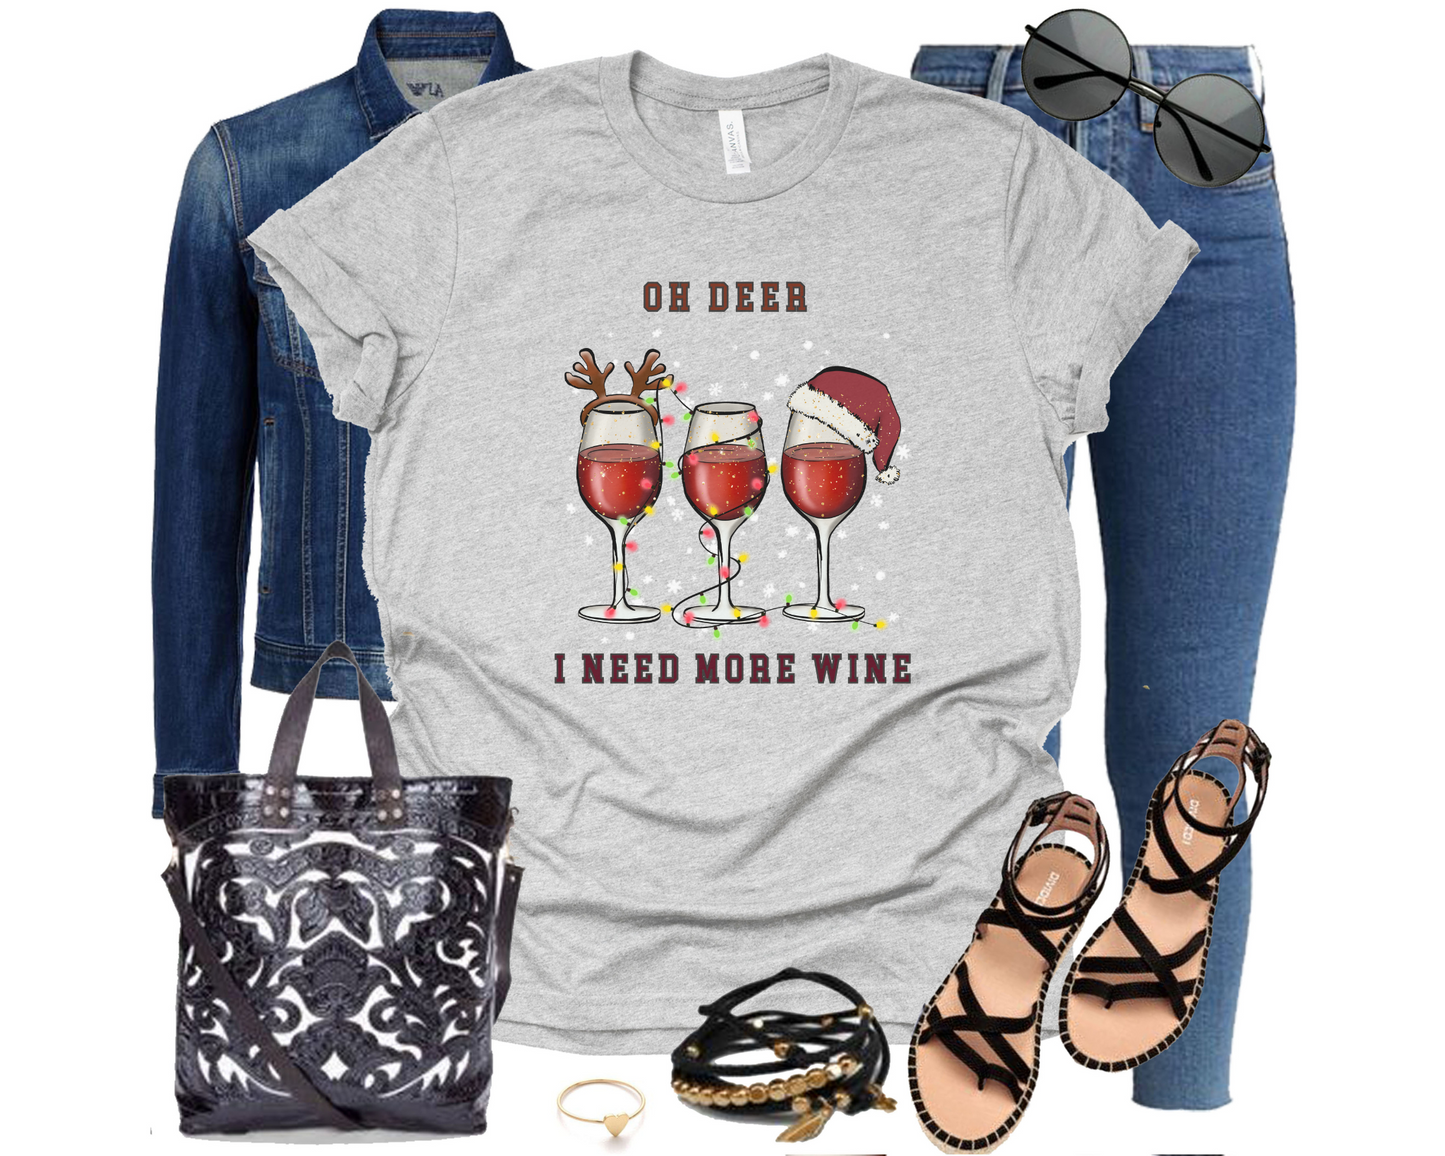 OH DEER I NEED MORE WINE T-shirt